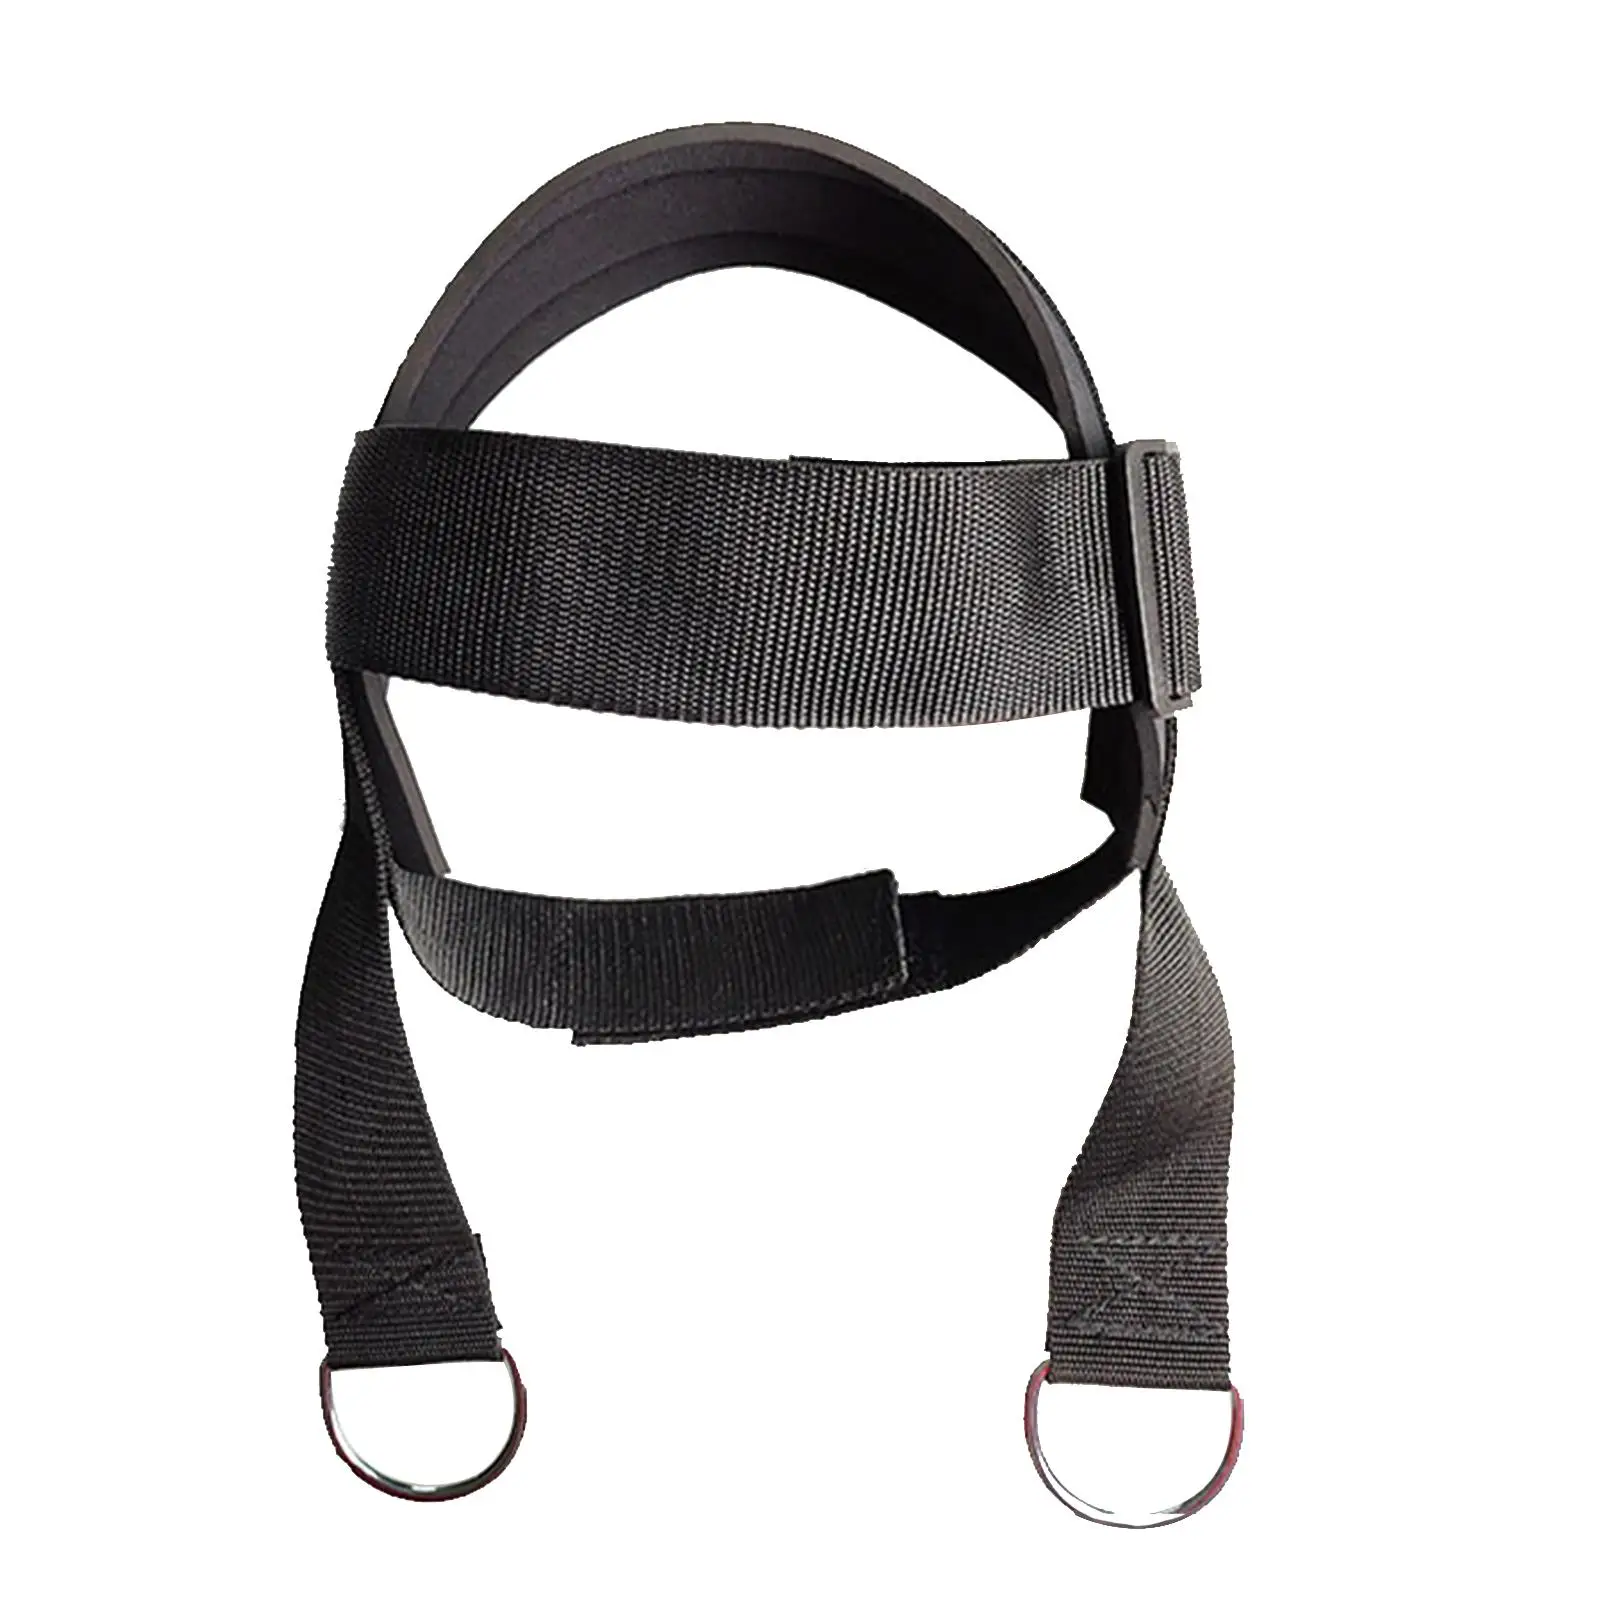 Head Neck Harness with Metal Loop Gym Exerciser Straps Bodybuilding Weight Lifting for Workout Neck Curls Fitness Unisex Trainer